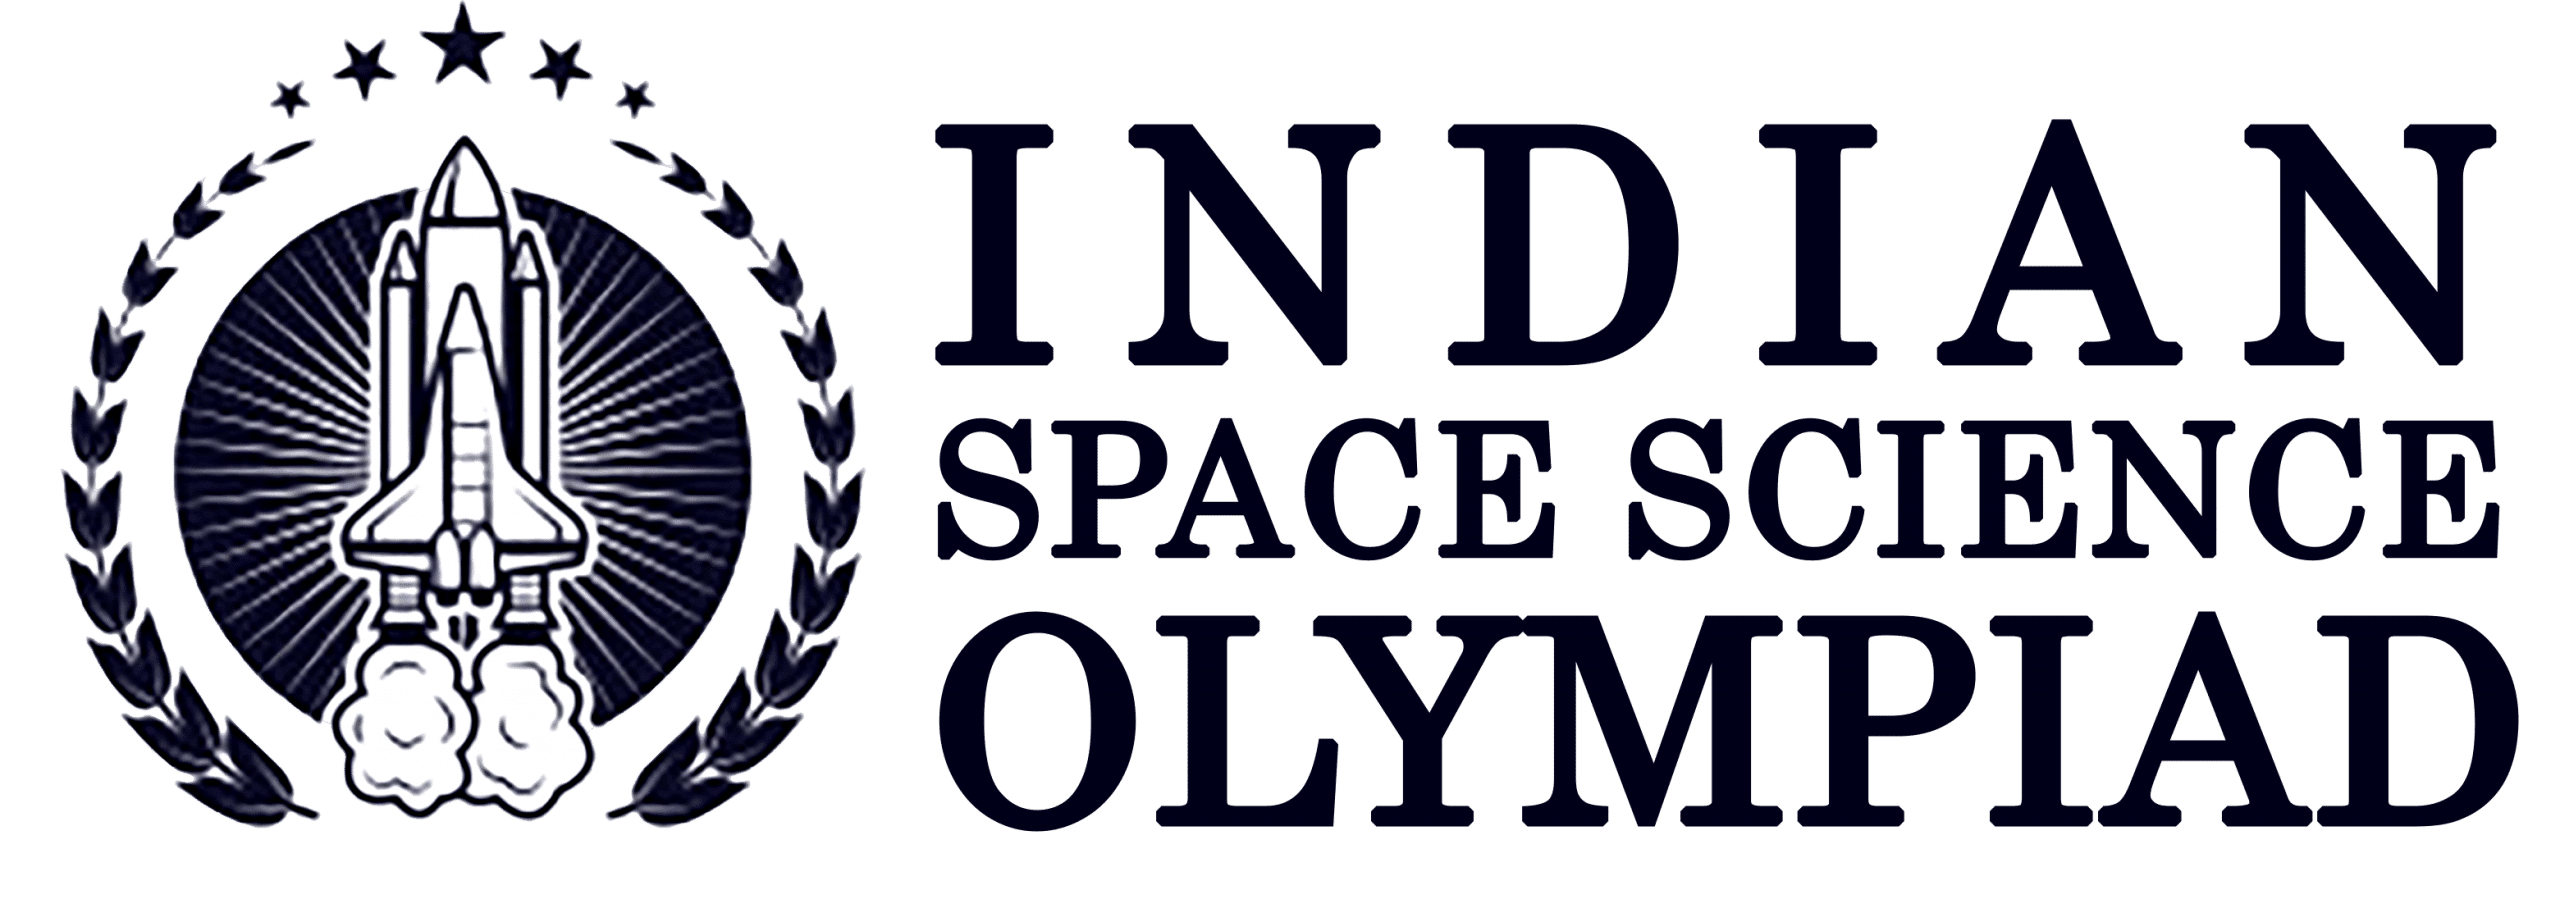 Indian Space Science Olympiad